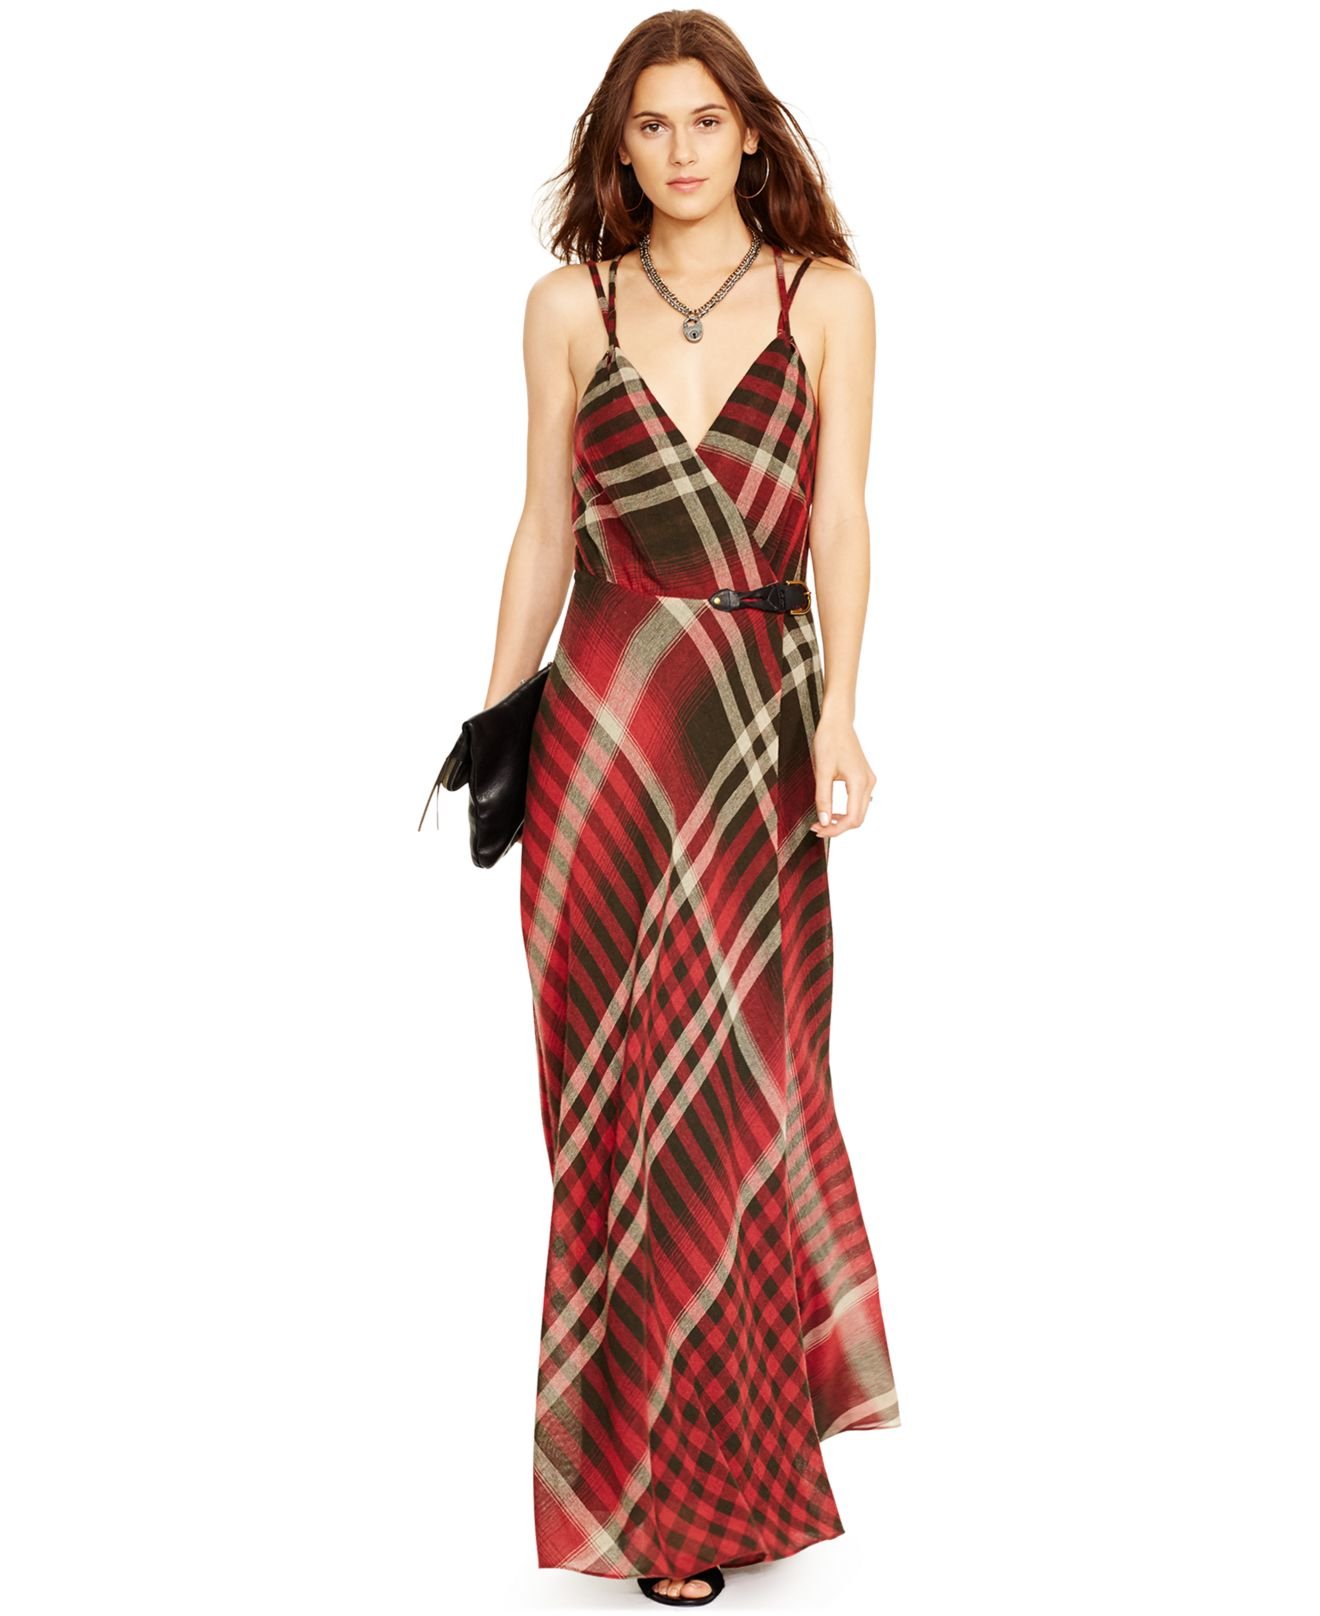 Polo Ralph Lauren Plaid Wrap Maxi Dress in Red/Black (Red) | Lyst